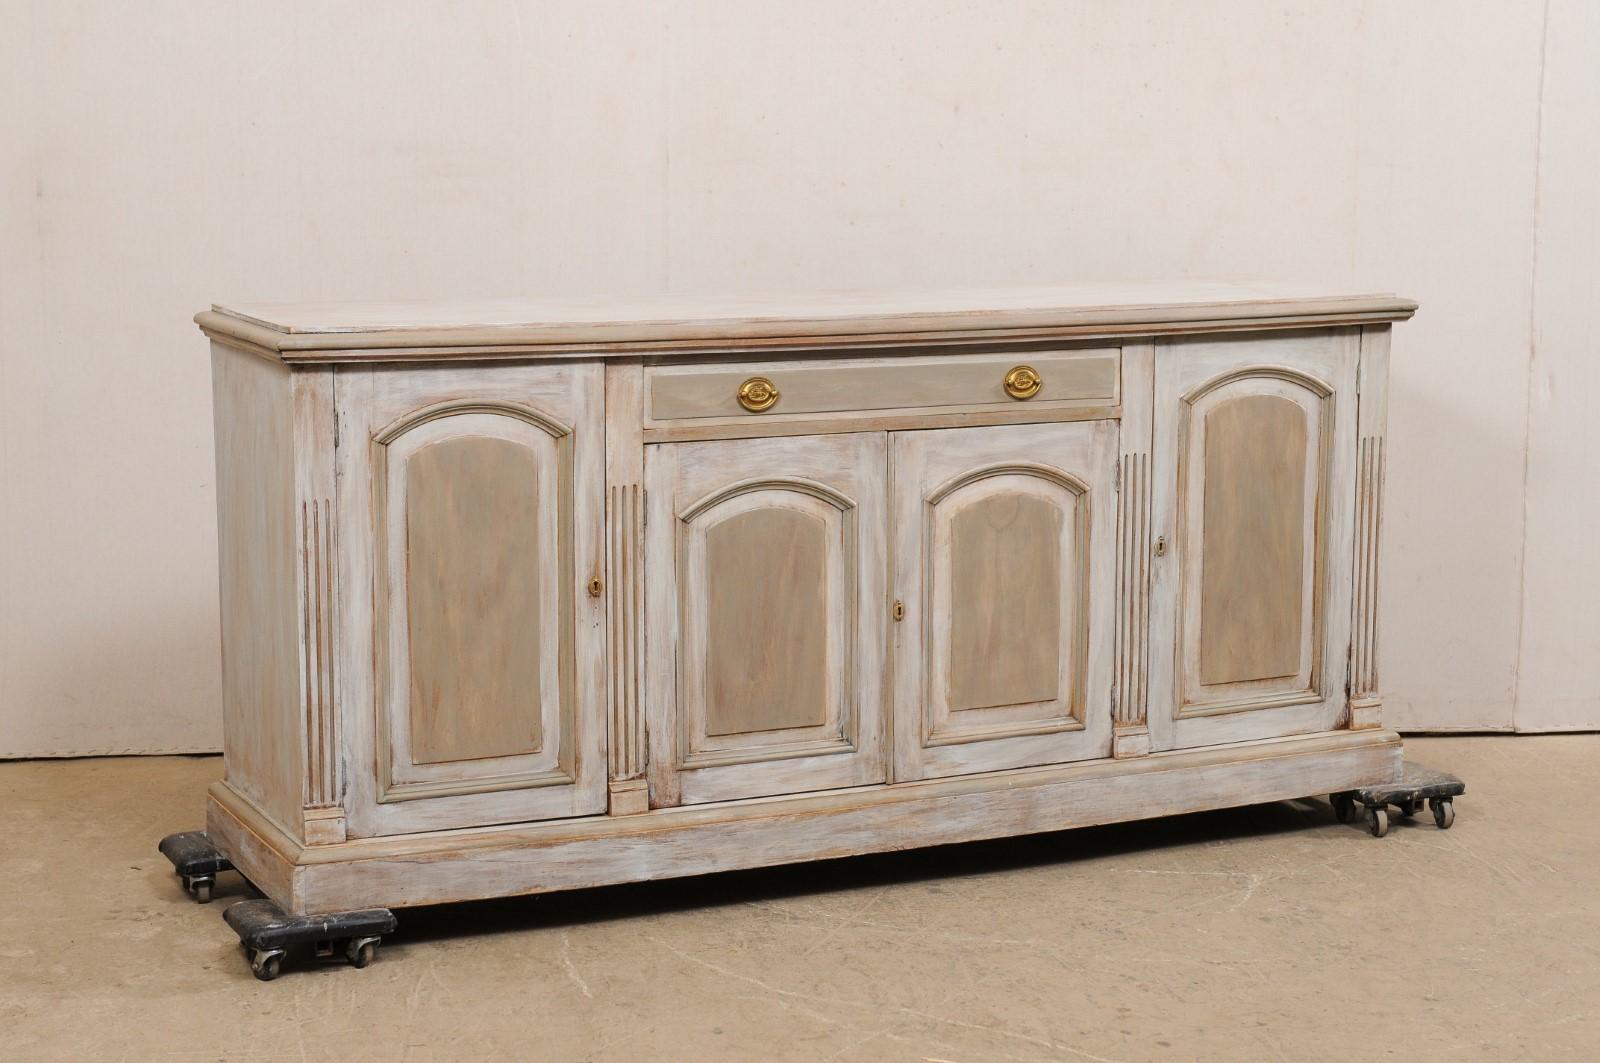 A French carved and painted wood buffet console cabinet from the turn of the 19th and 20th century. This antique sideboard from France, approximately 7 feet in length, features a rectangular-shaped top with molded edge, above a case which houses a